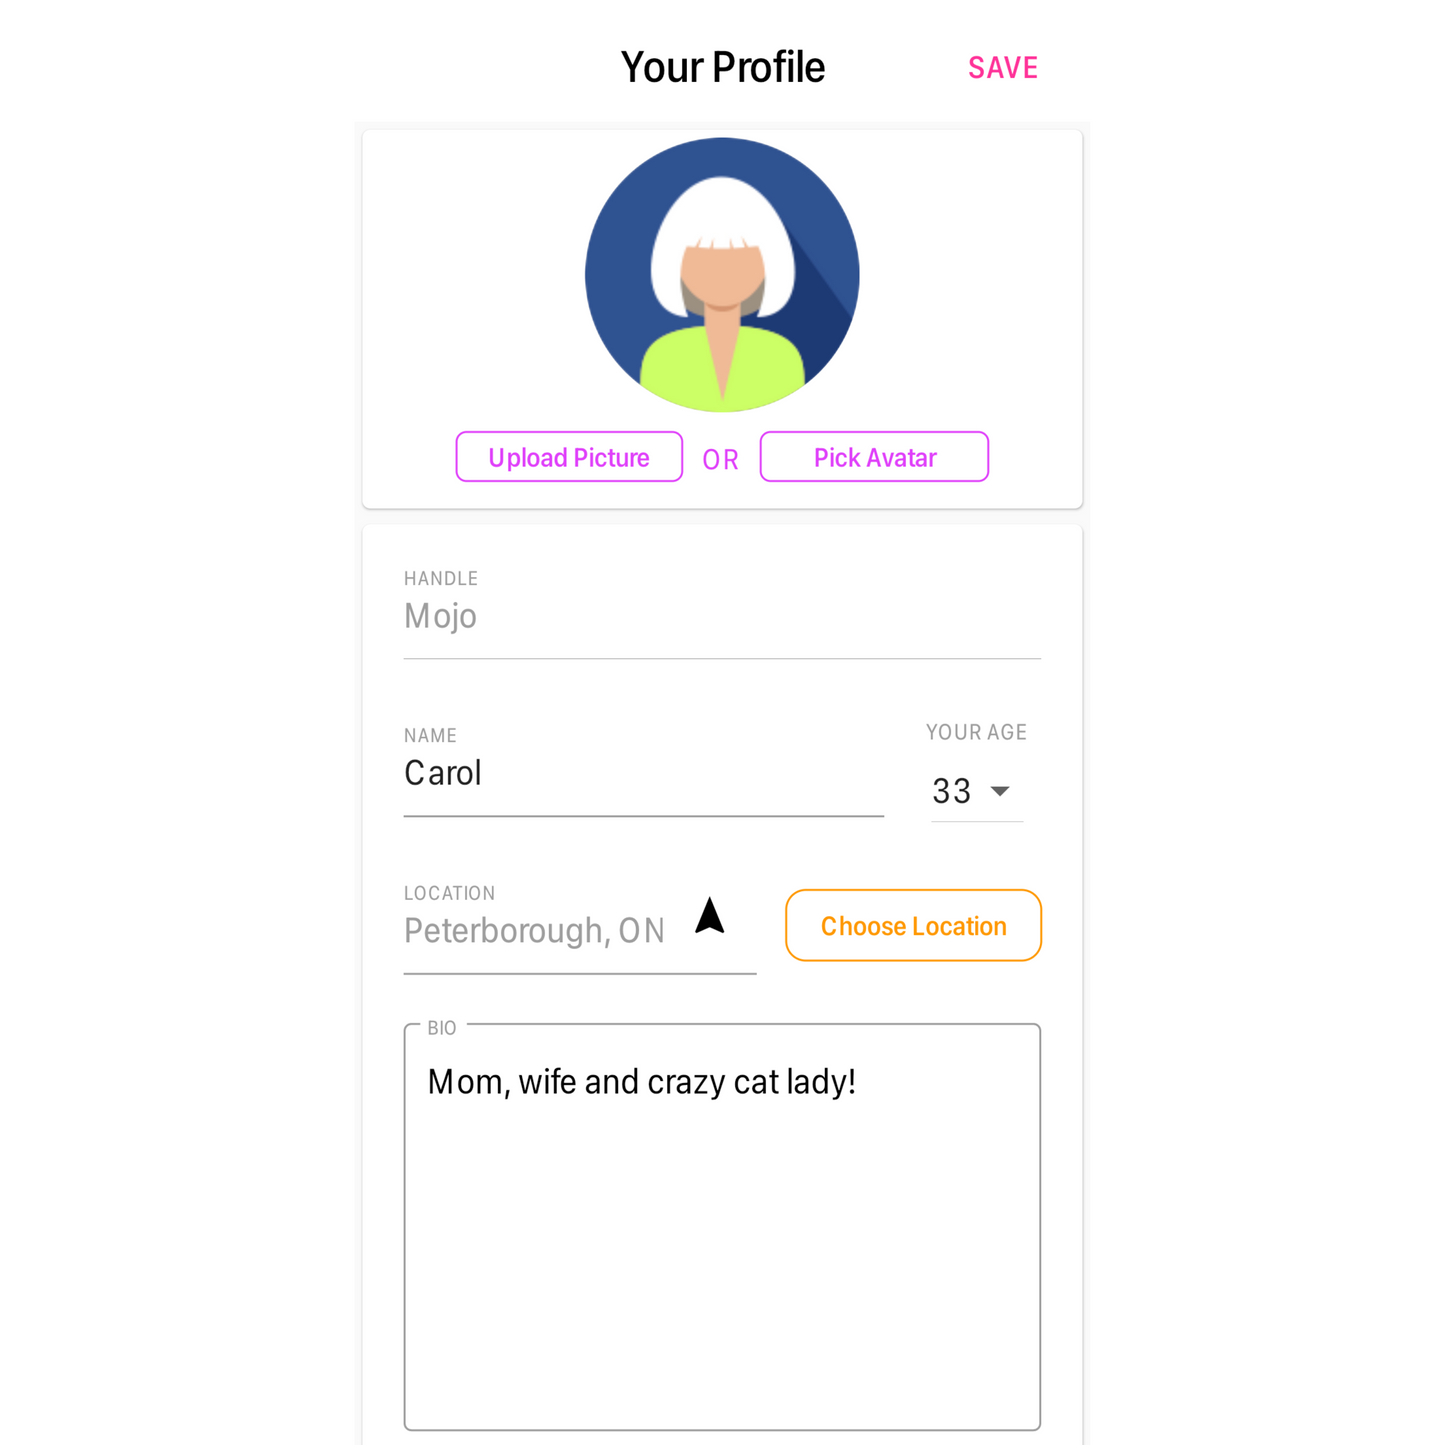 Image of the Create your Profile page in the Mamasoup app that allows you to choose an avatar, create a handle, input your name, age and location and fill in a bio.